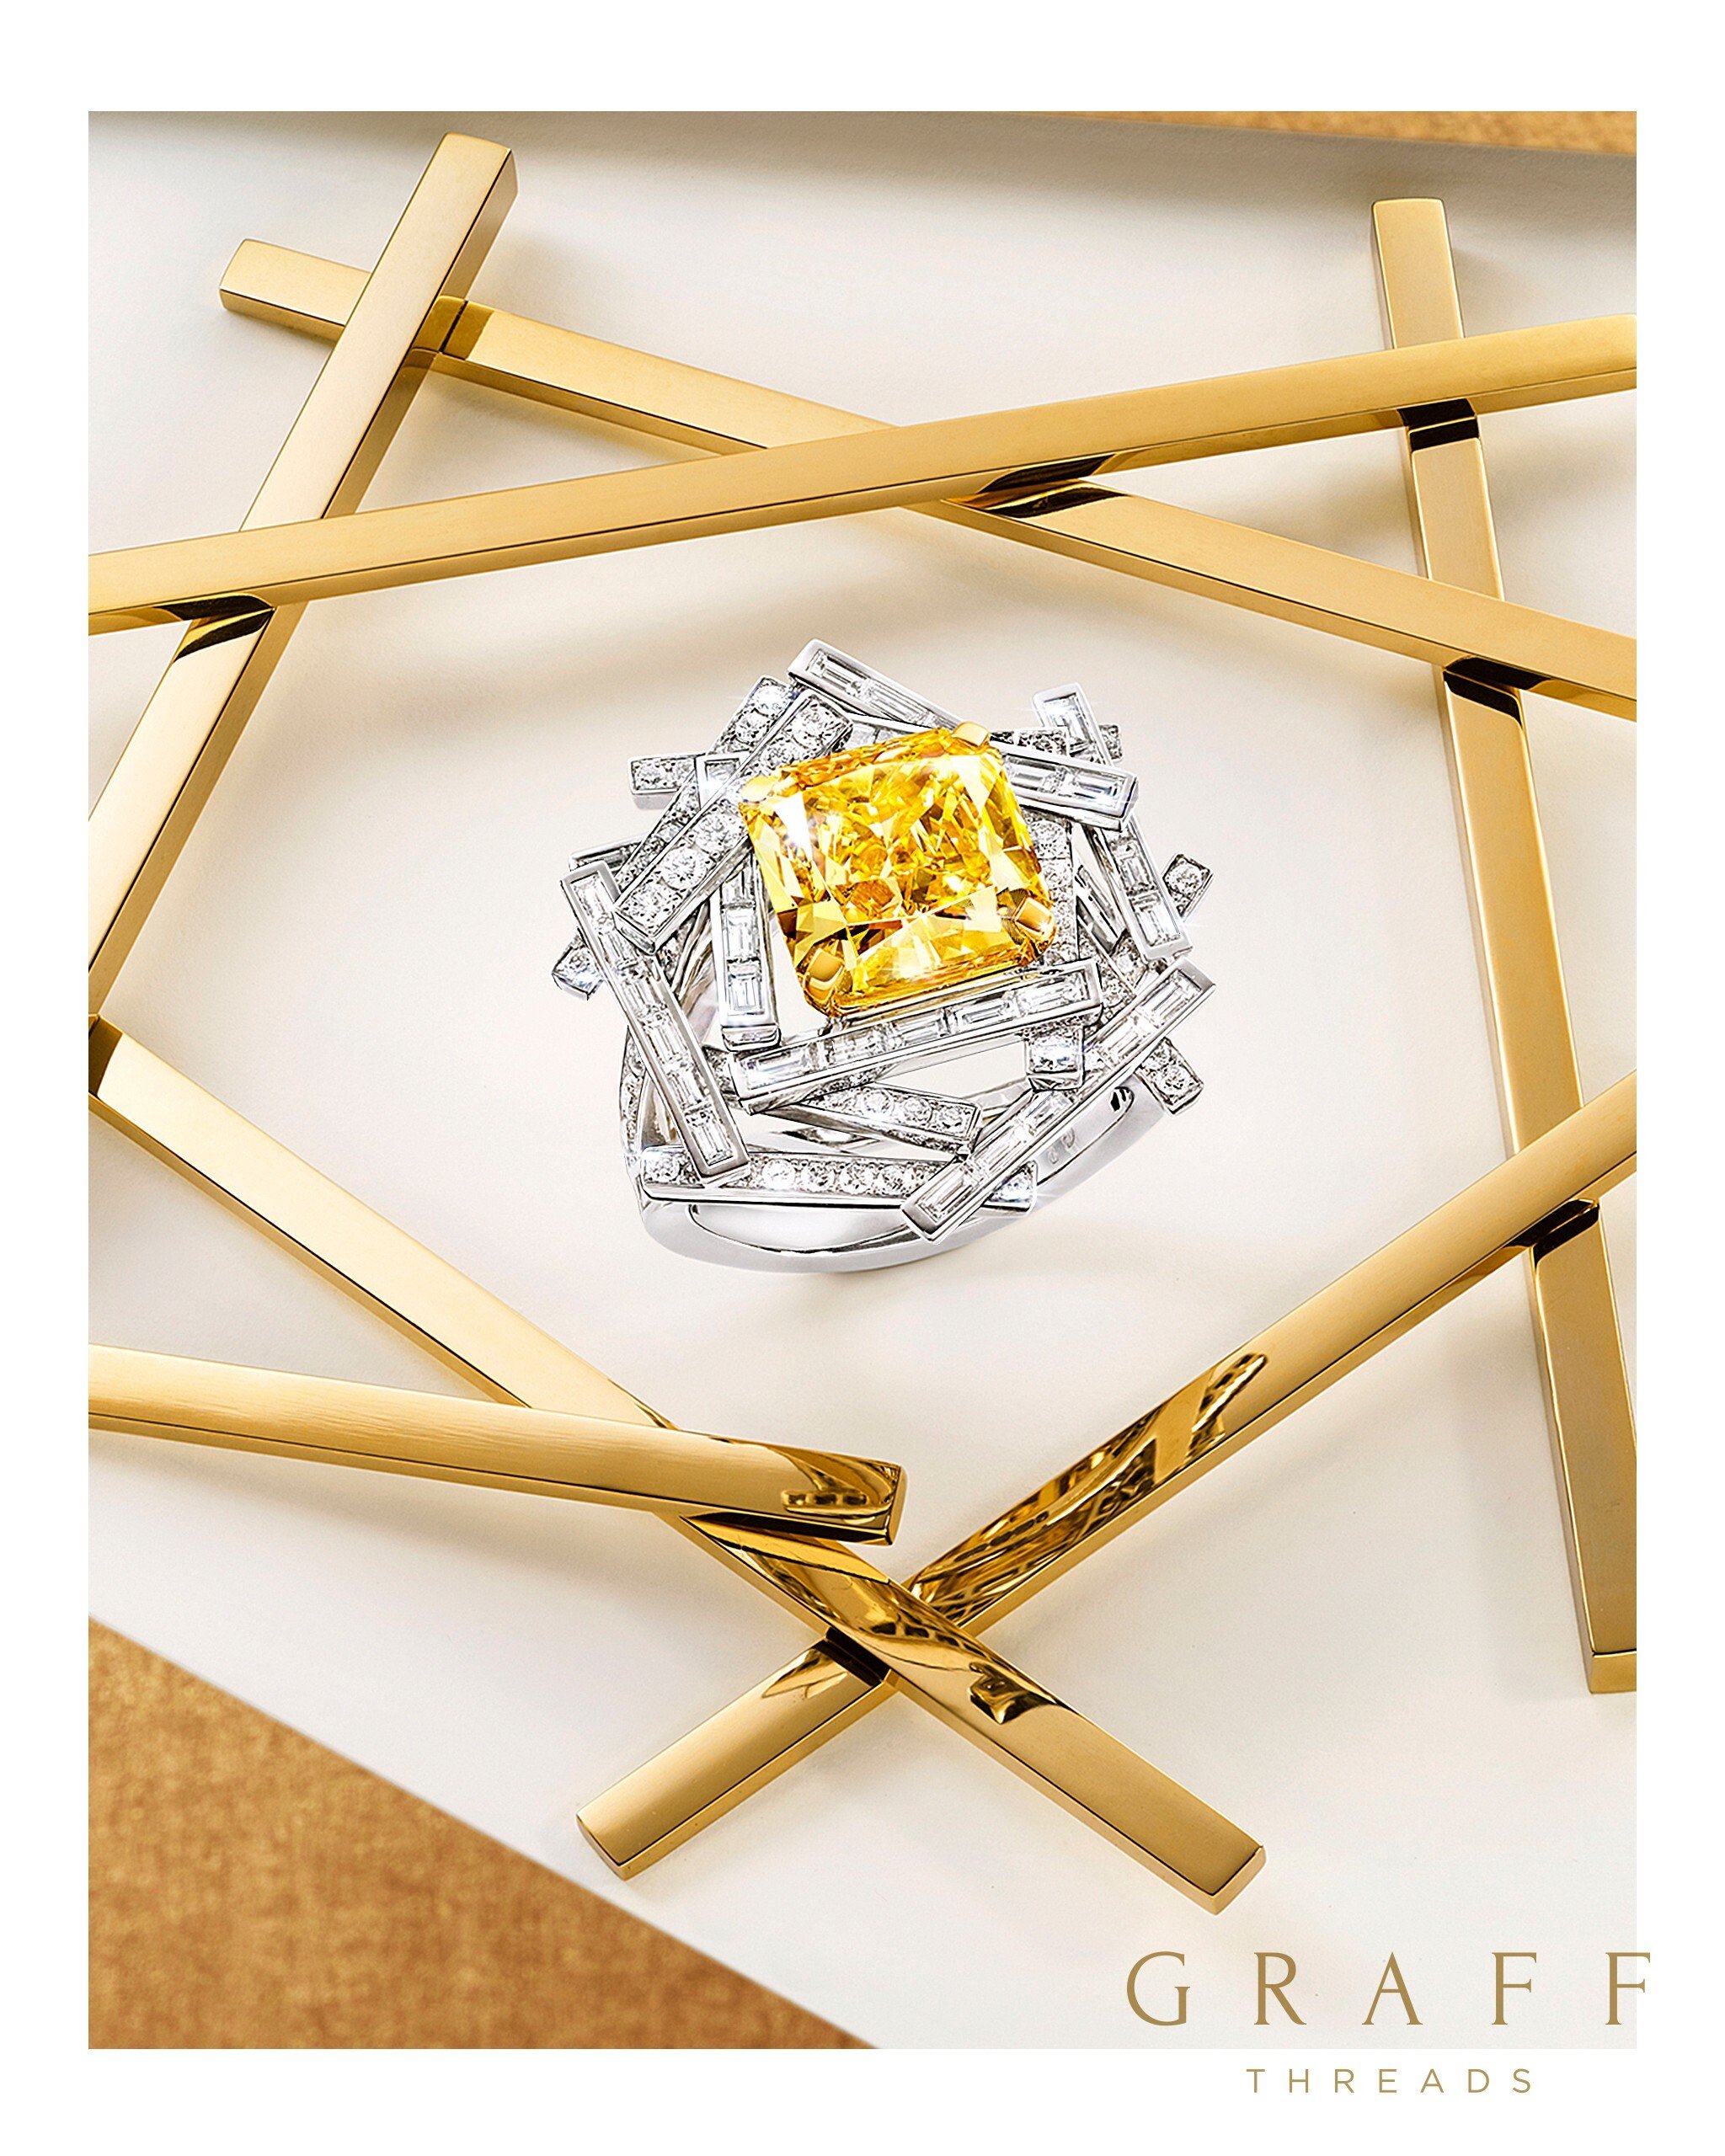 Graff jewellery from the Threads collection – just an example of the latest 2020 range from the luxury brand. Photo: Graff